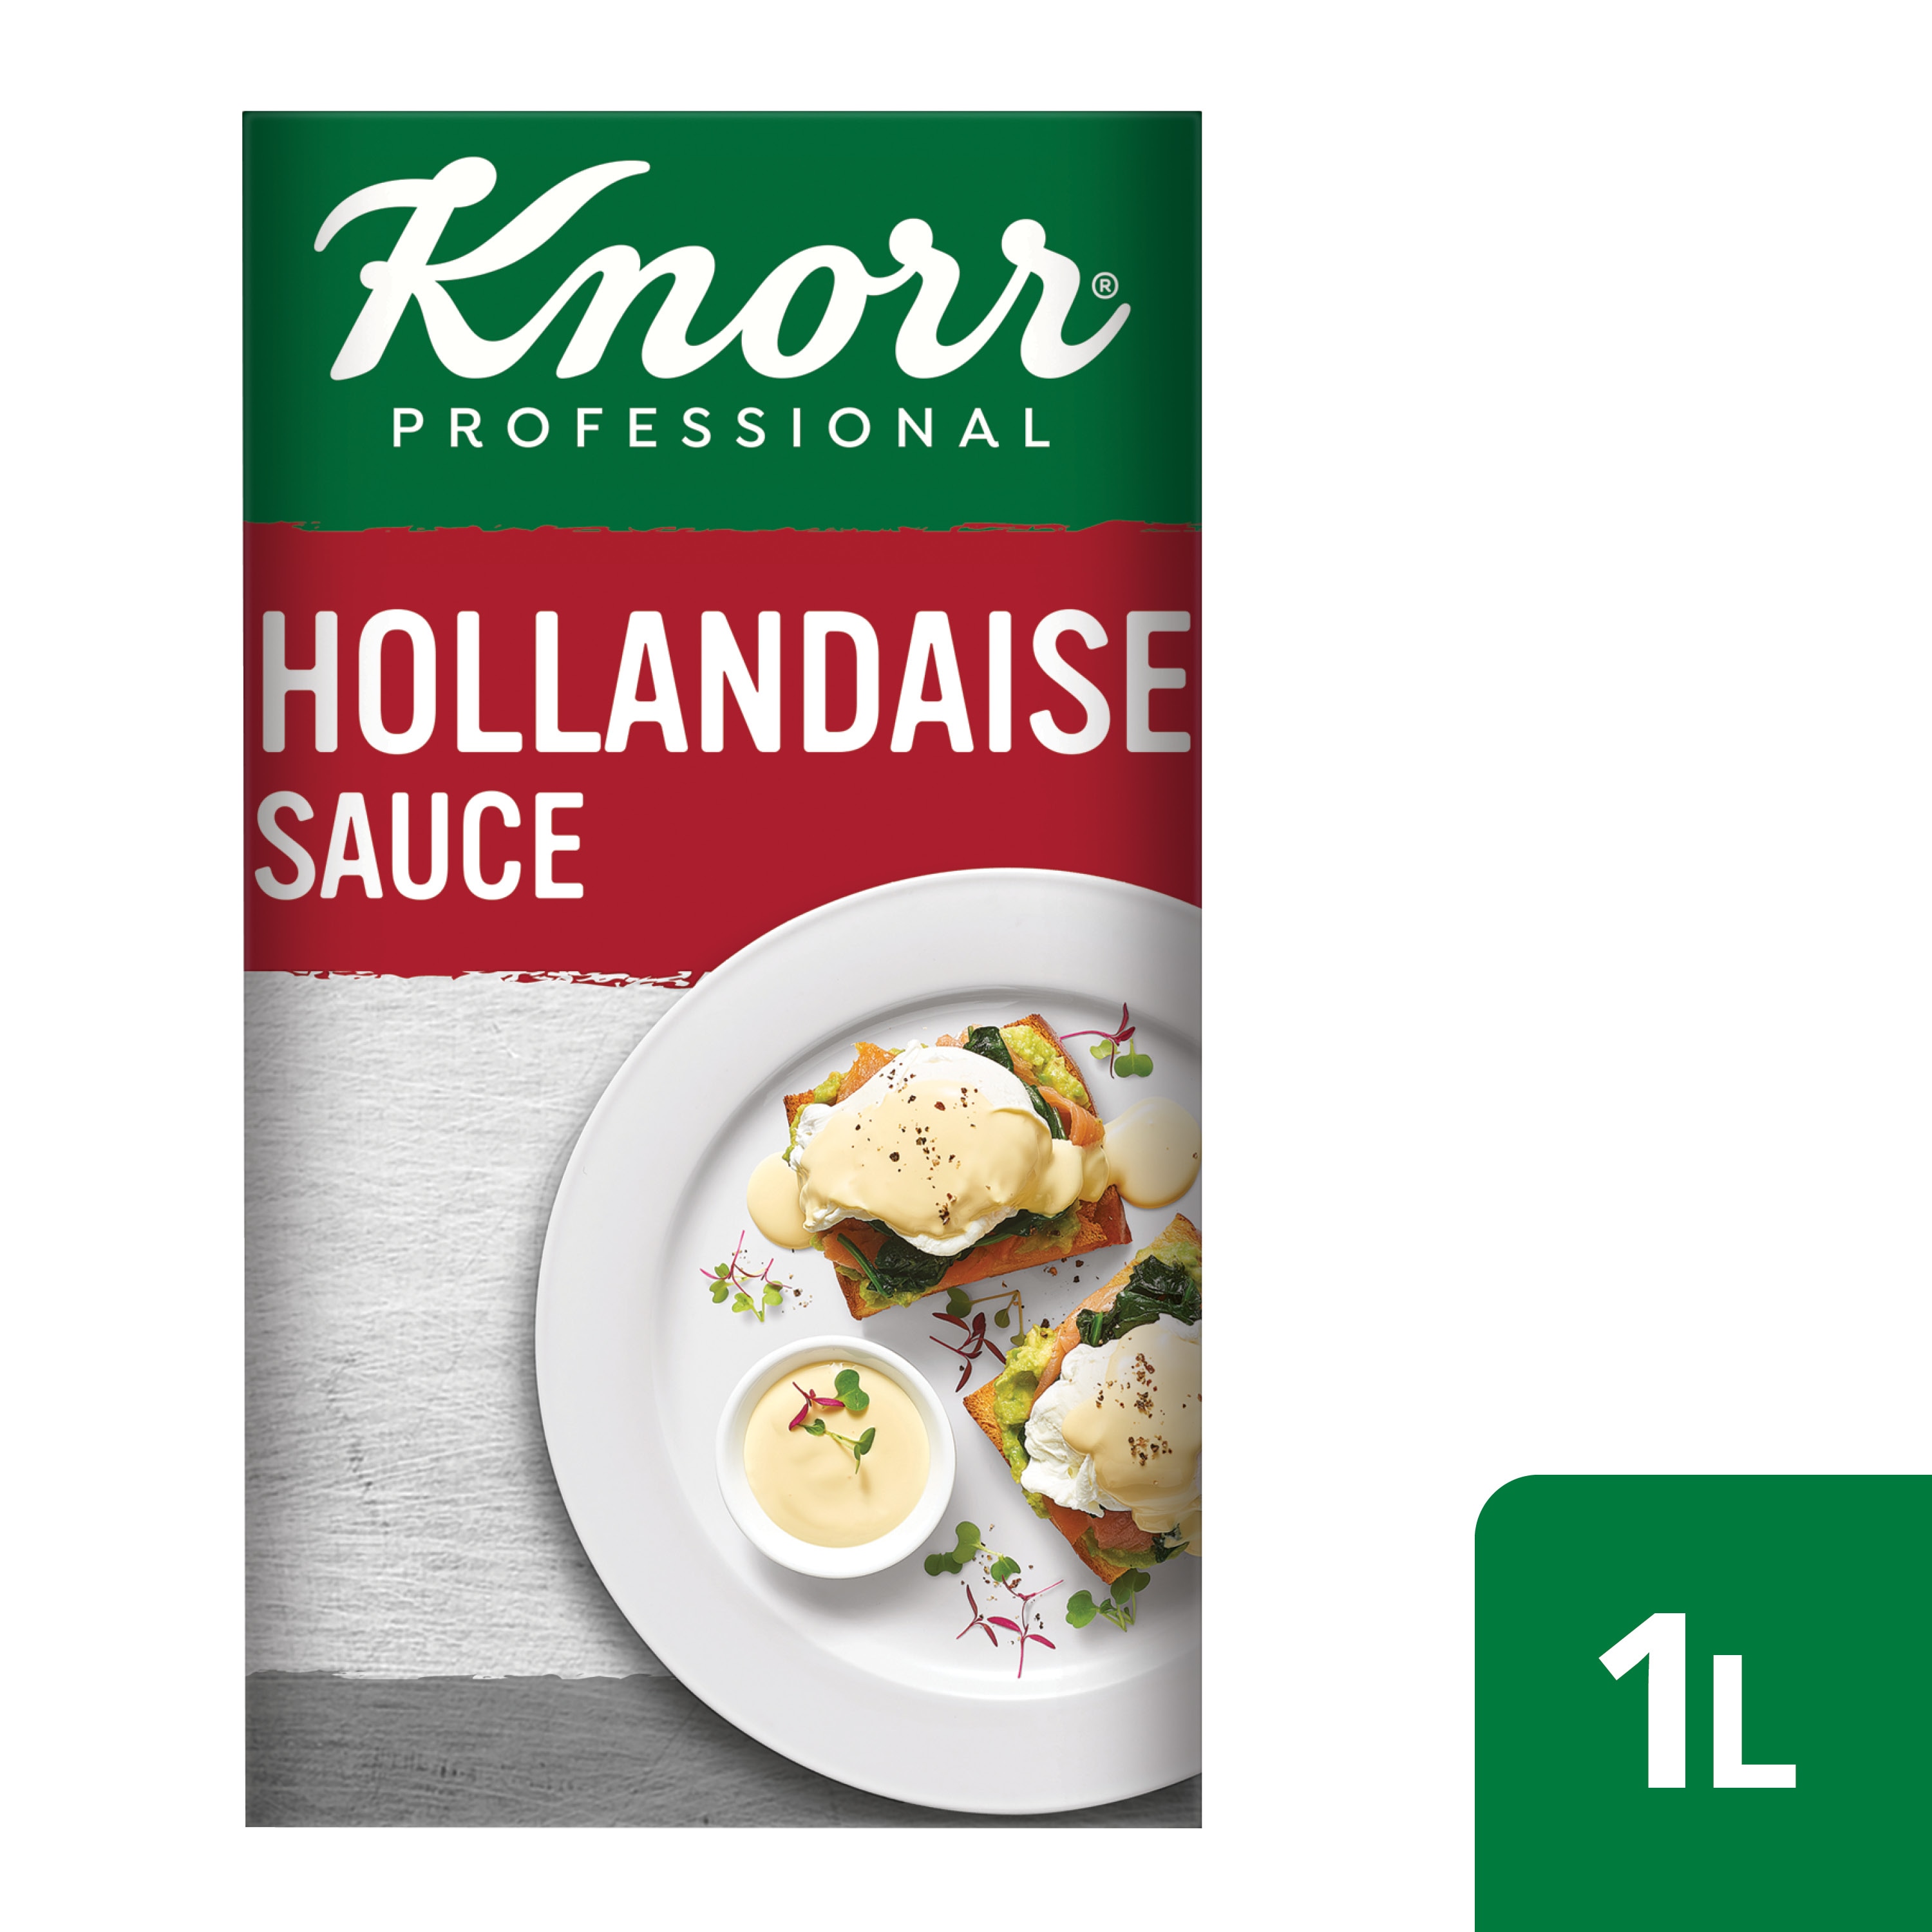 Knorr Professional Hollandaise Sauce - Here’s our heat and pour Hollandaise that stands up to the pressure.